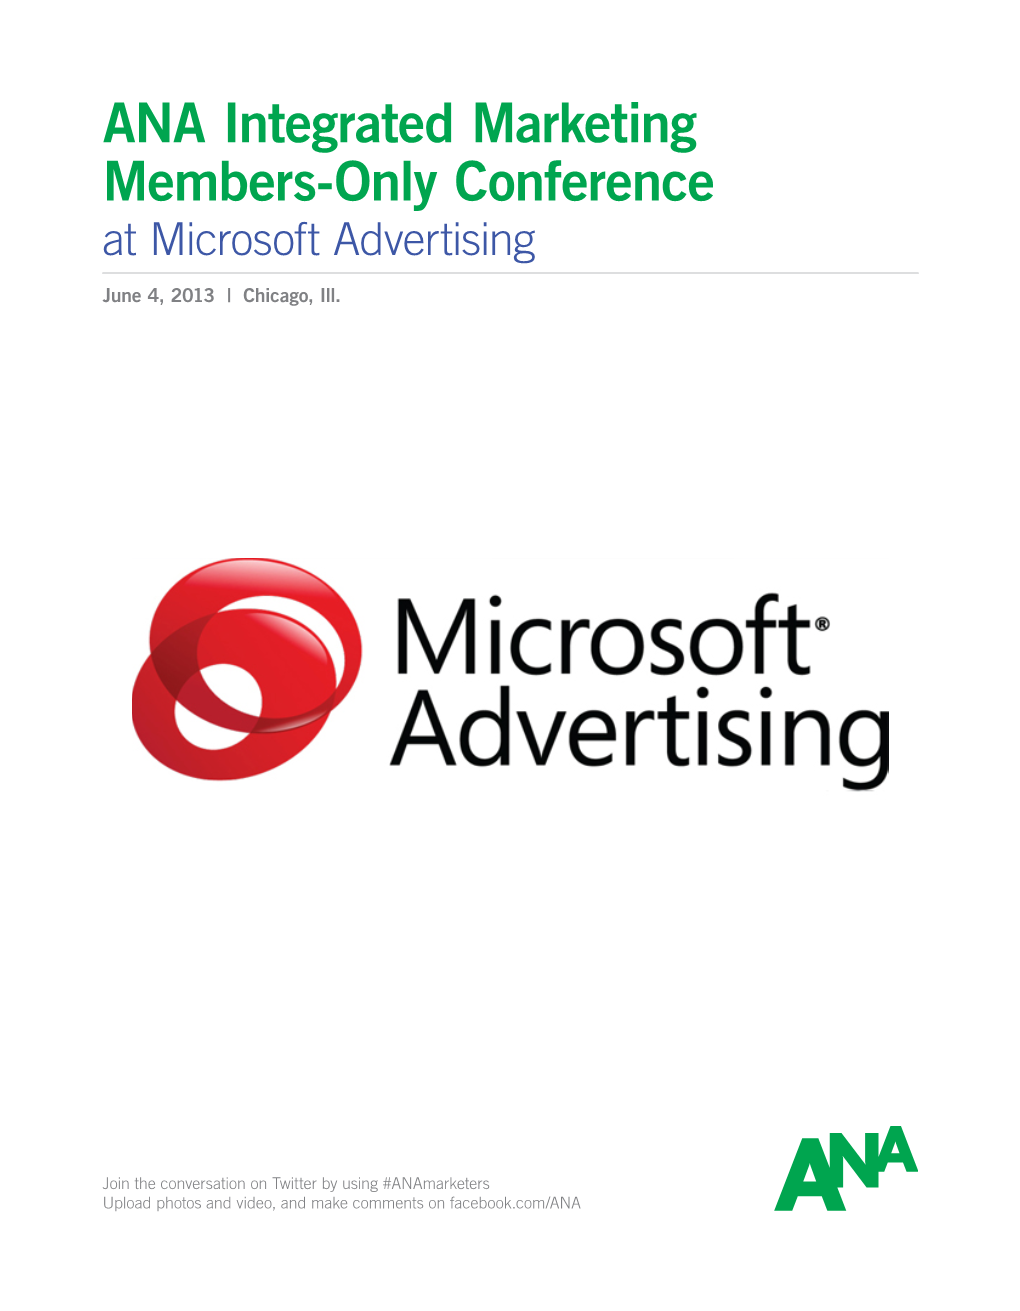 ANA Integrated Marketing Members-Only Conference at Microsoft Advertising